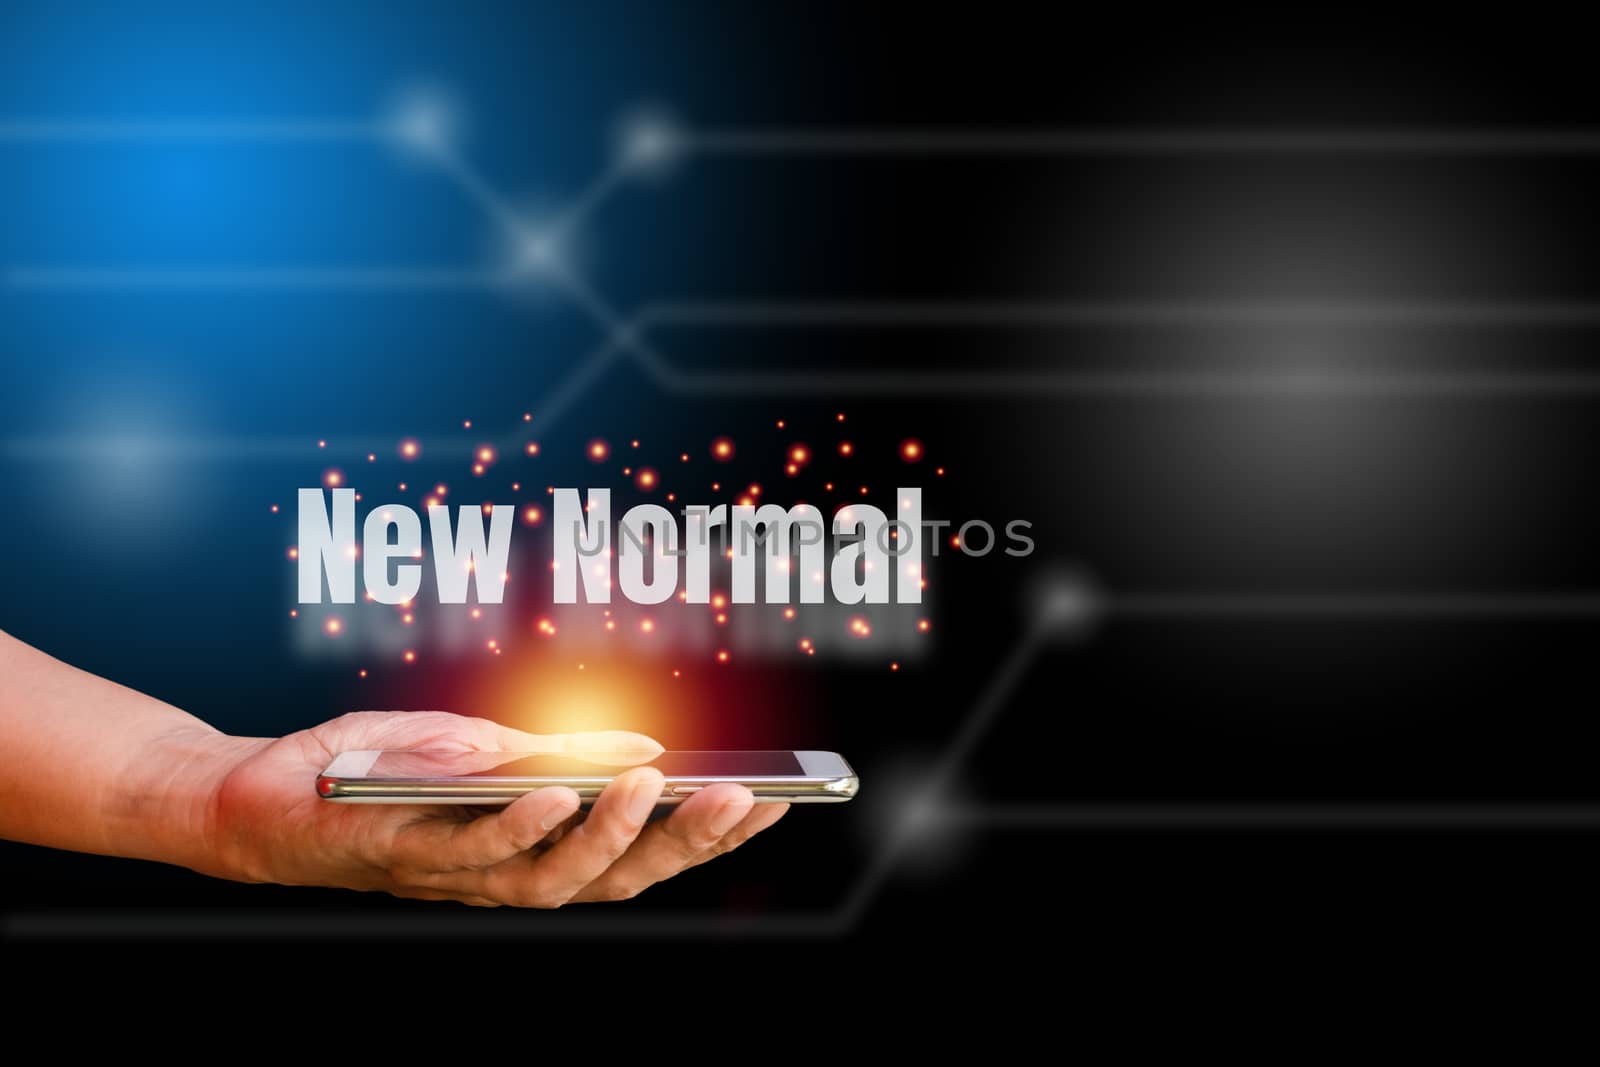 White world new normal on hand holding smartphone with orange light on blue and black technology background. New normal concept.